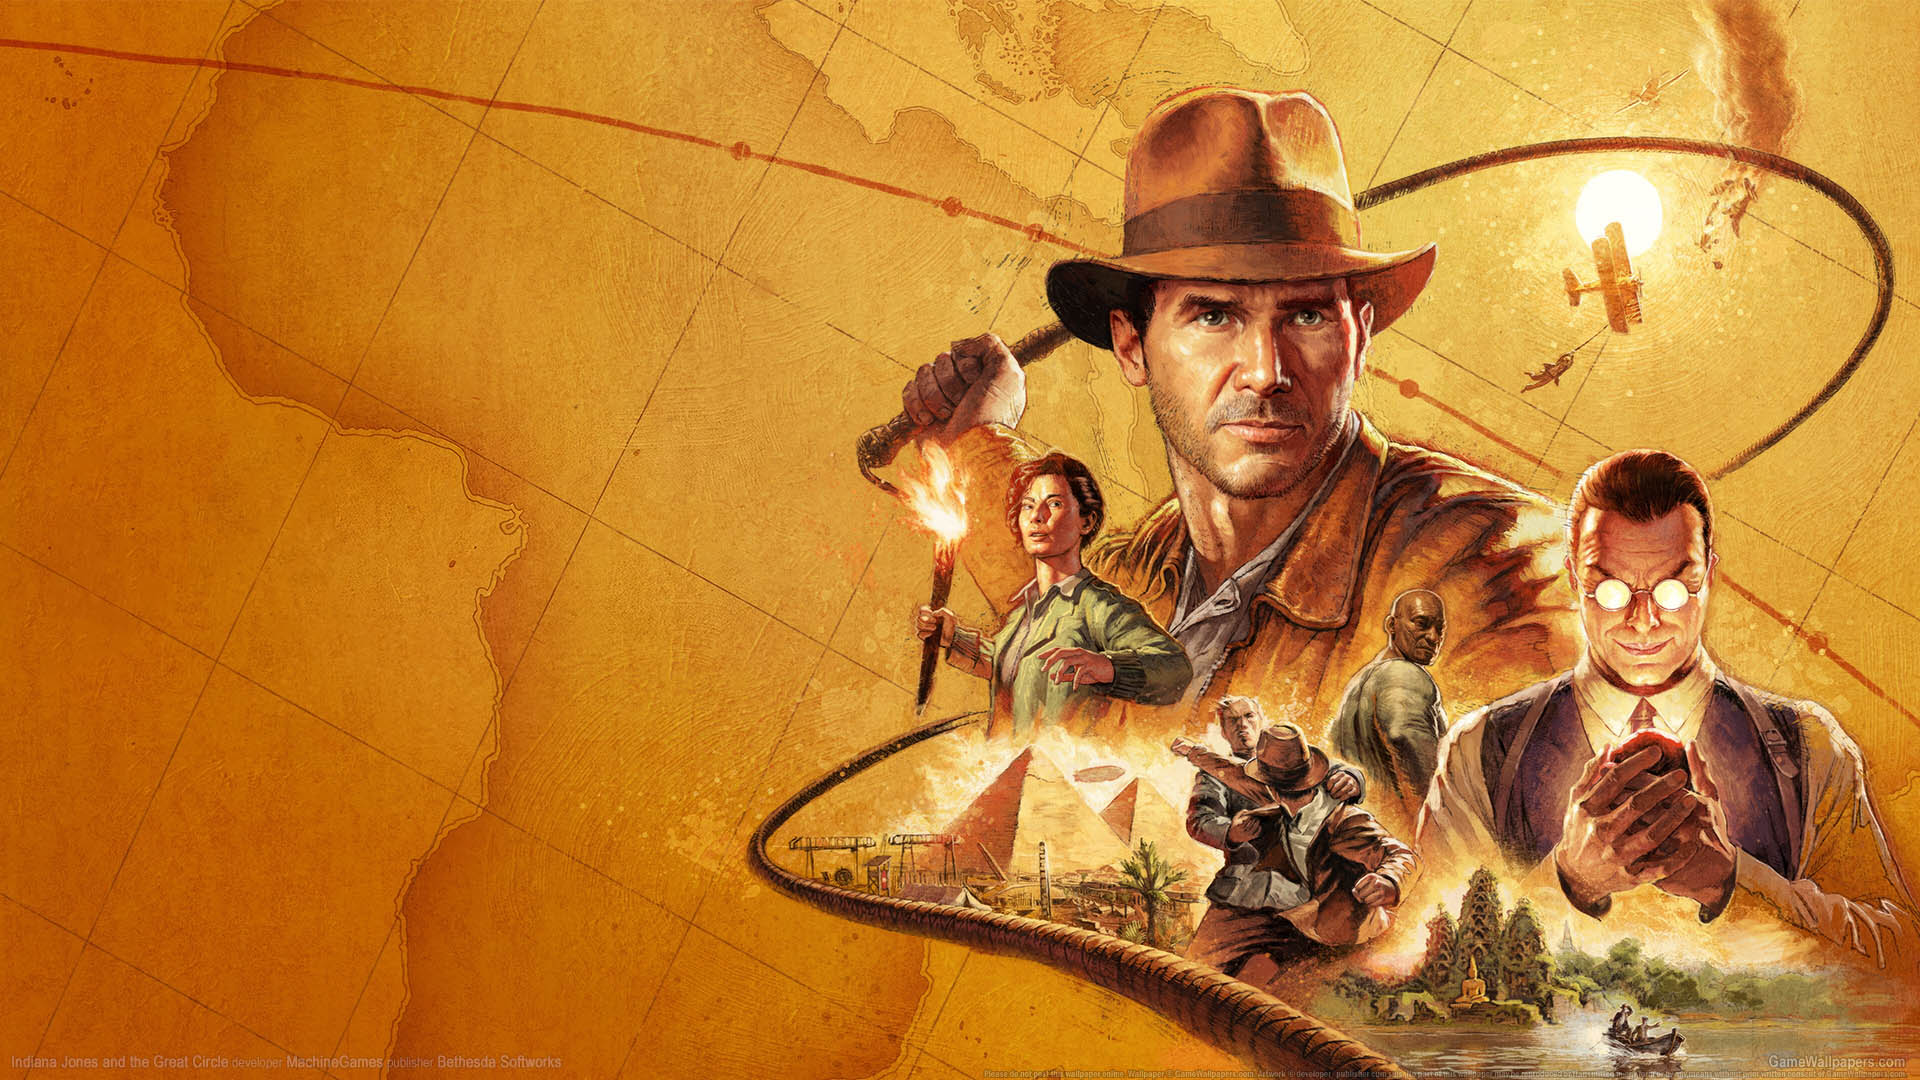 Indiana Jones and the Great Circle wallpaper 01 1920x1080